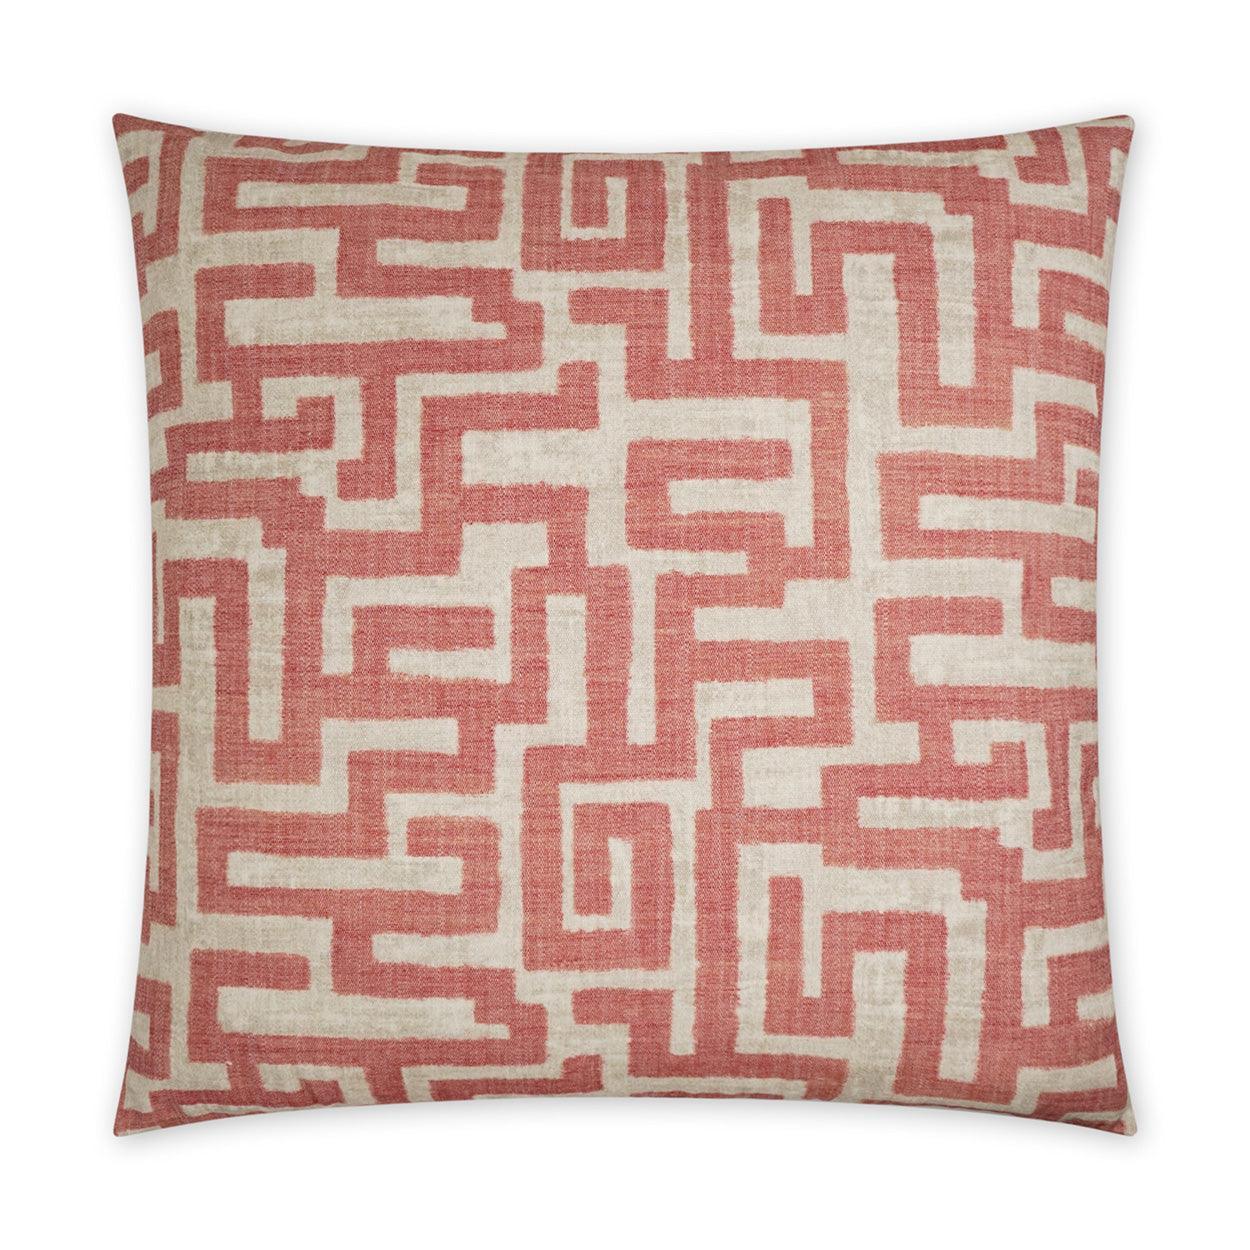 Giotto Rose Global Geometric Blush Large Throw Pillow With Insert - Uptown Sebastian